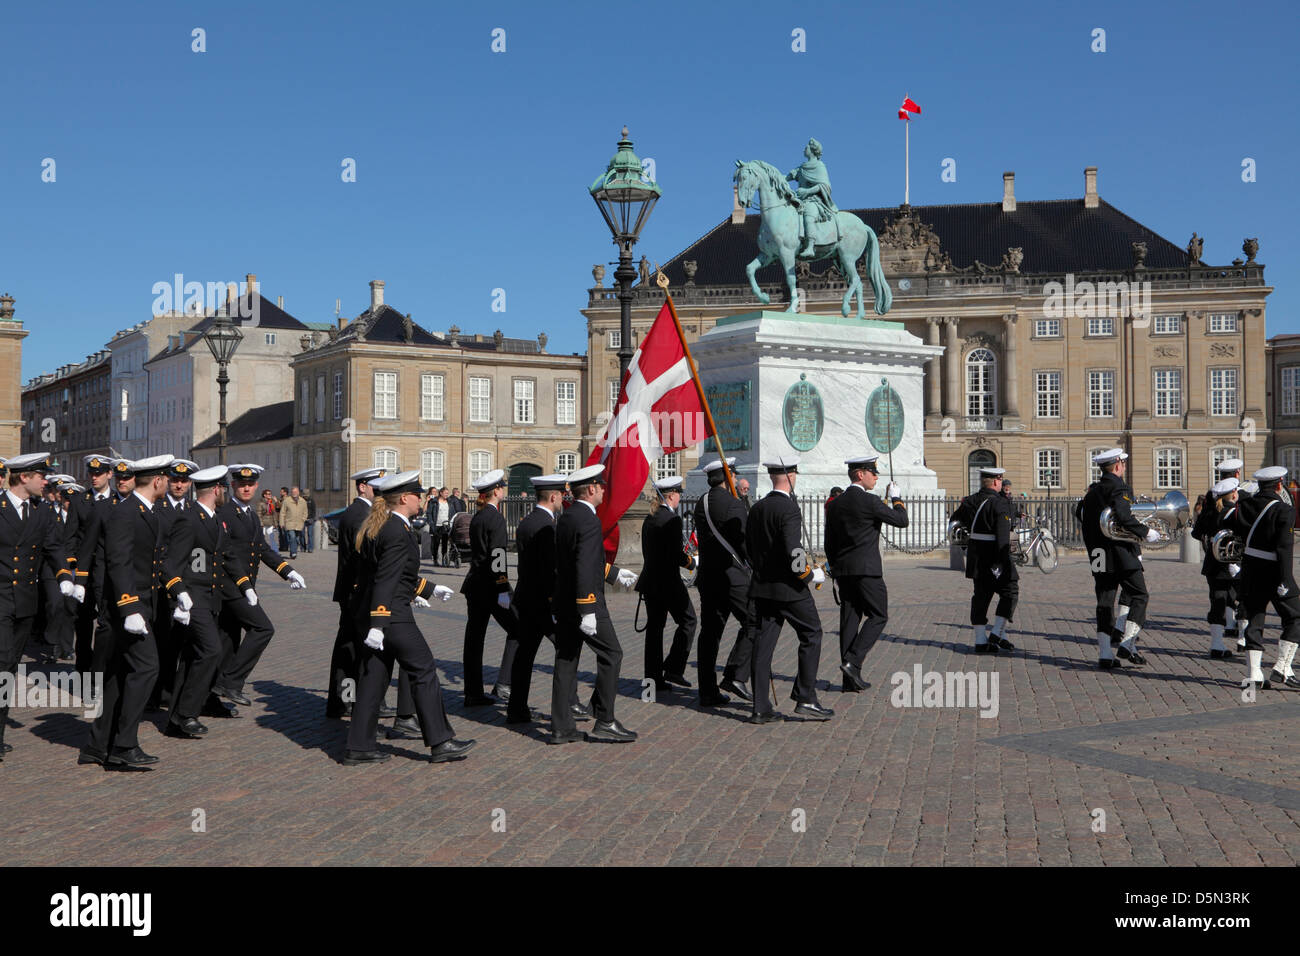 Copenhagen, Denmark. April 4th 2013. Cadets from the Royal Danish Naval Academy accompanied by the playing and singing Royal Danish Navy Band  passing the Amalienborg Palace Square during their “Flag on Board” parade through Copenhagen to mark the beginning of a new sailing season. Credit:  Niels Quist / Alamy Live News Stock Photo